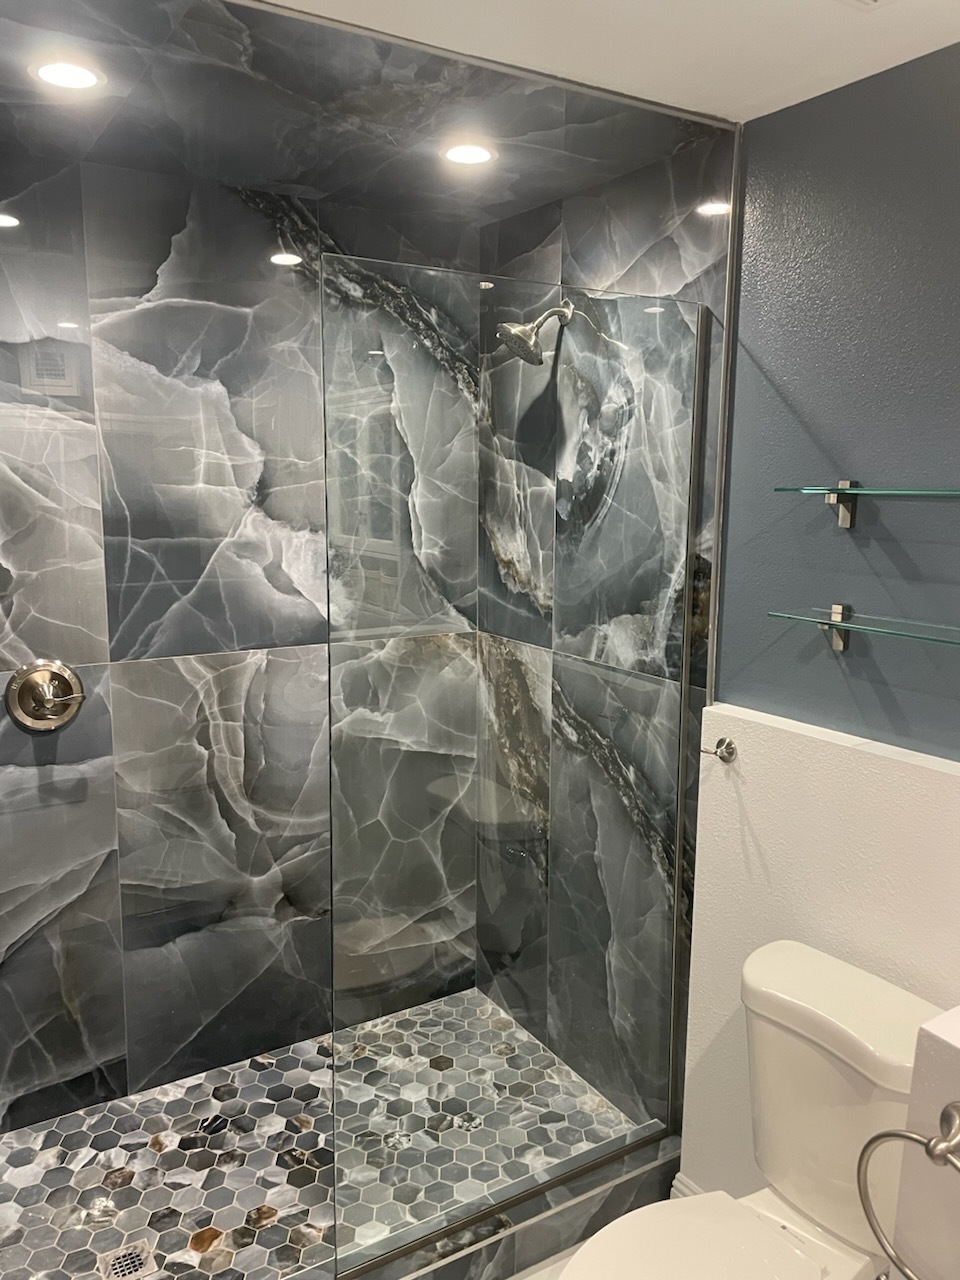 Bathroom remodeling services in Gilbert